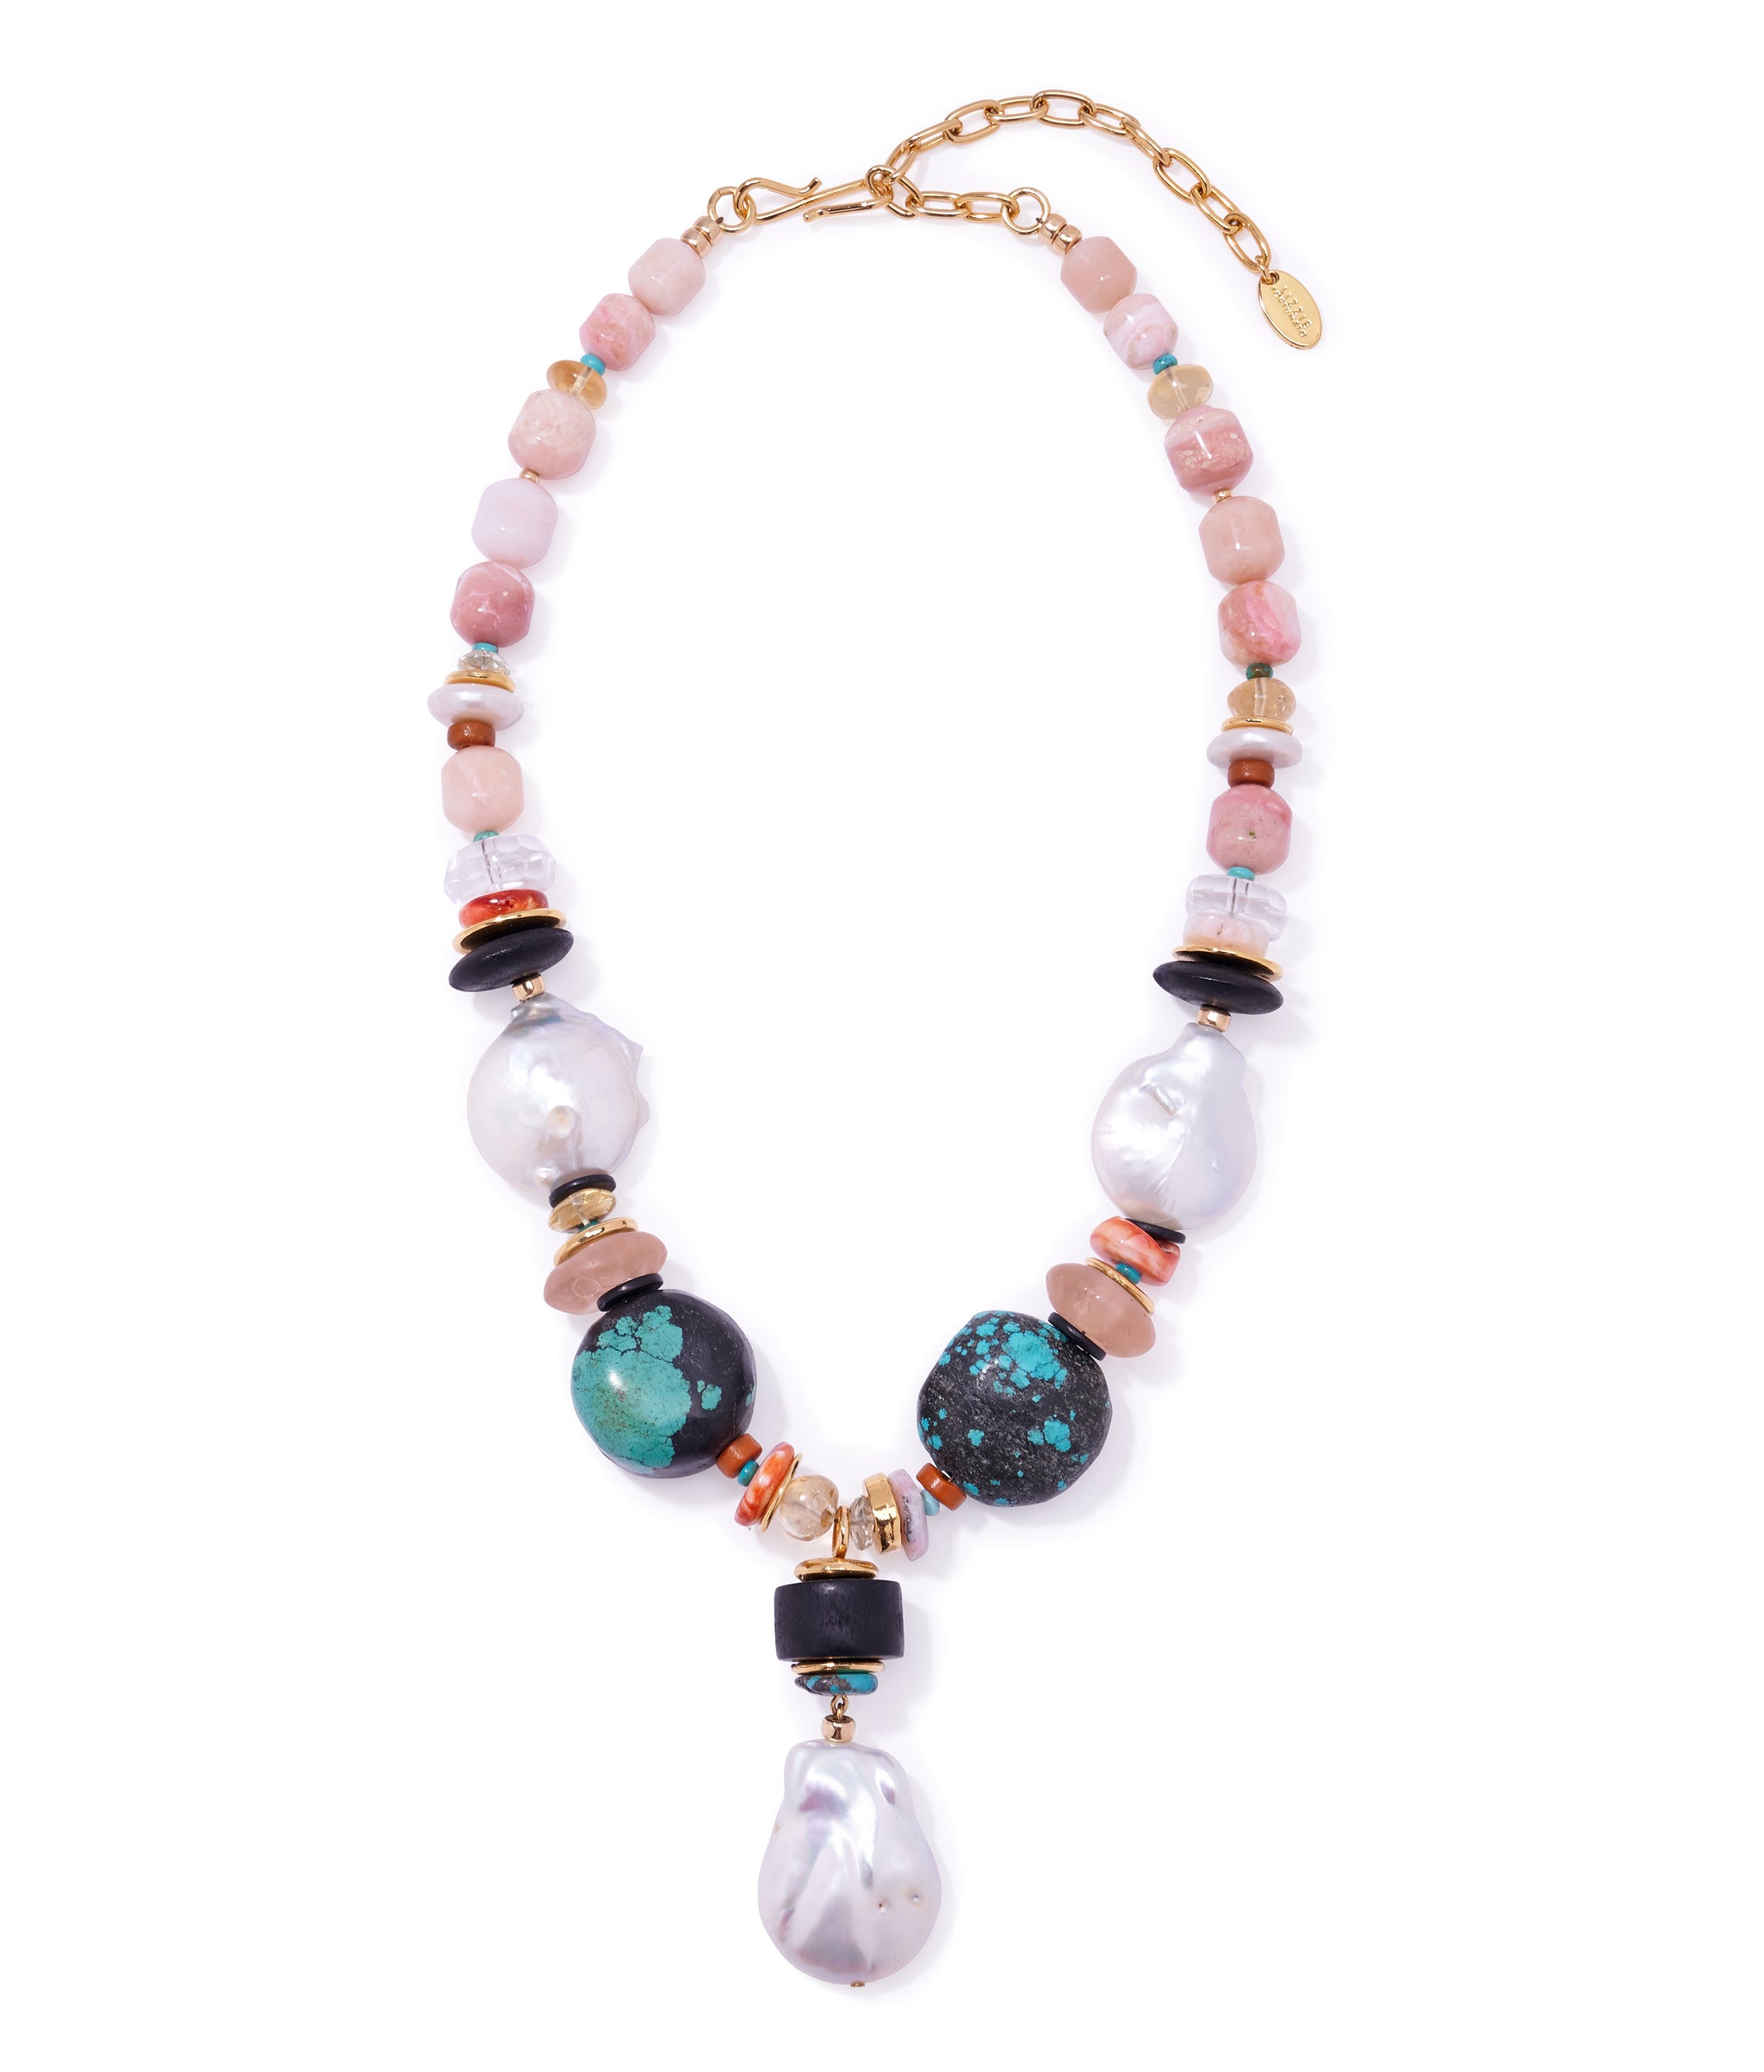 Forms in Nature Necklace. With beads in pink opal, pearl, turquoise, quartz, wood, bone, glass, green amethyst, and gold